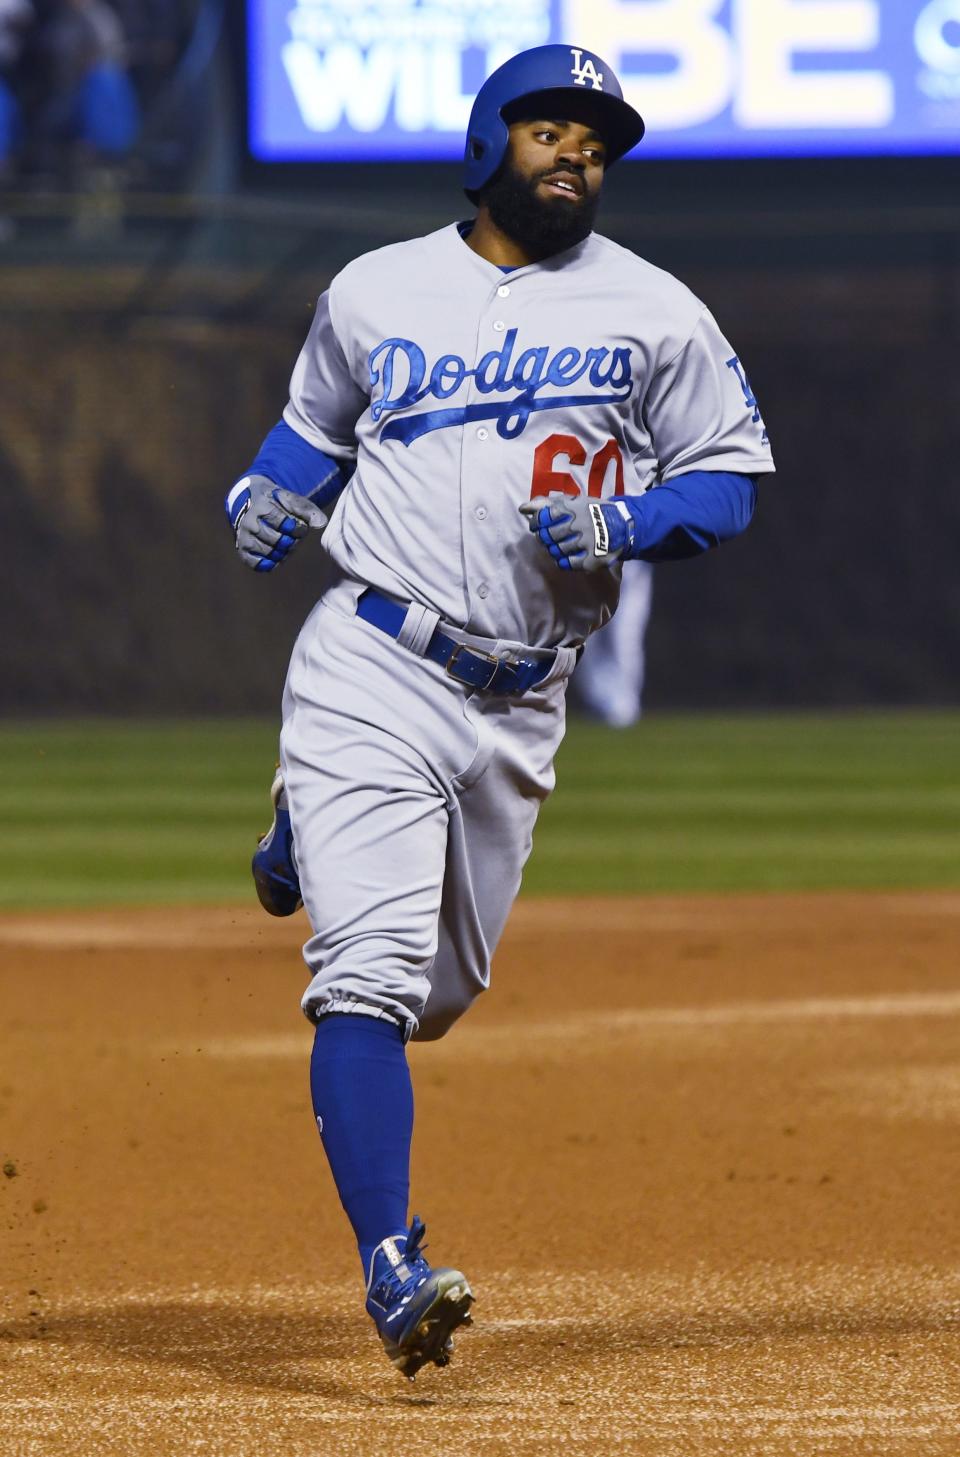 Andrew Toles played in parts of three seasons (2016-18) with the Dodgers.